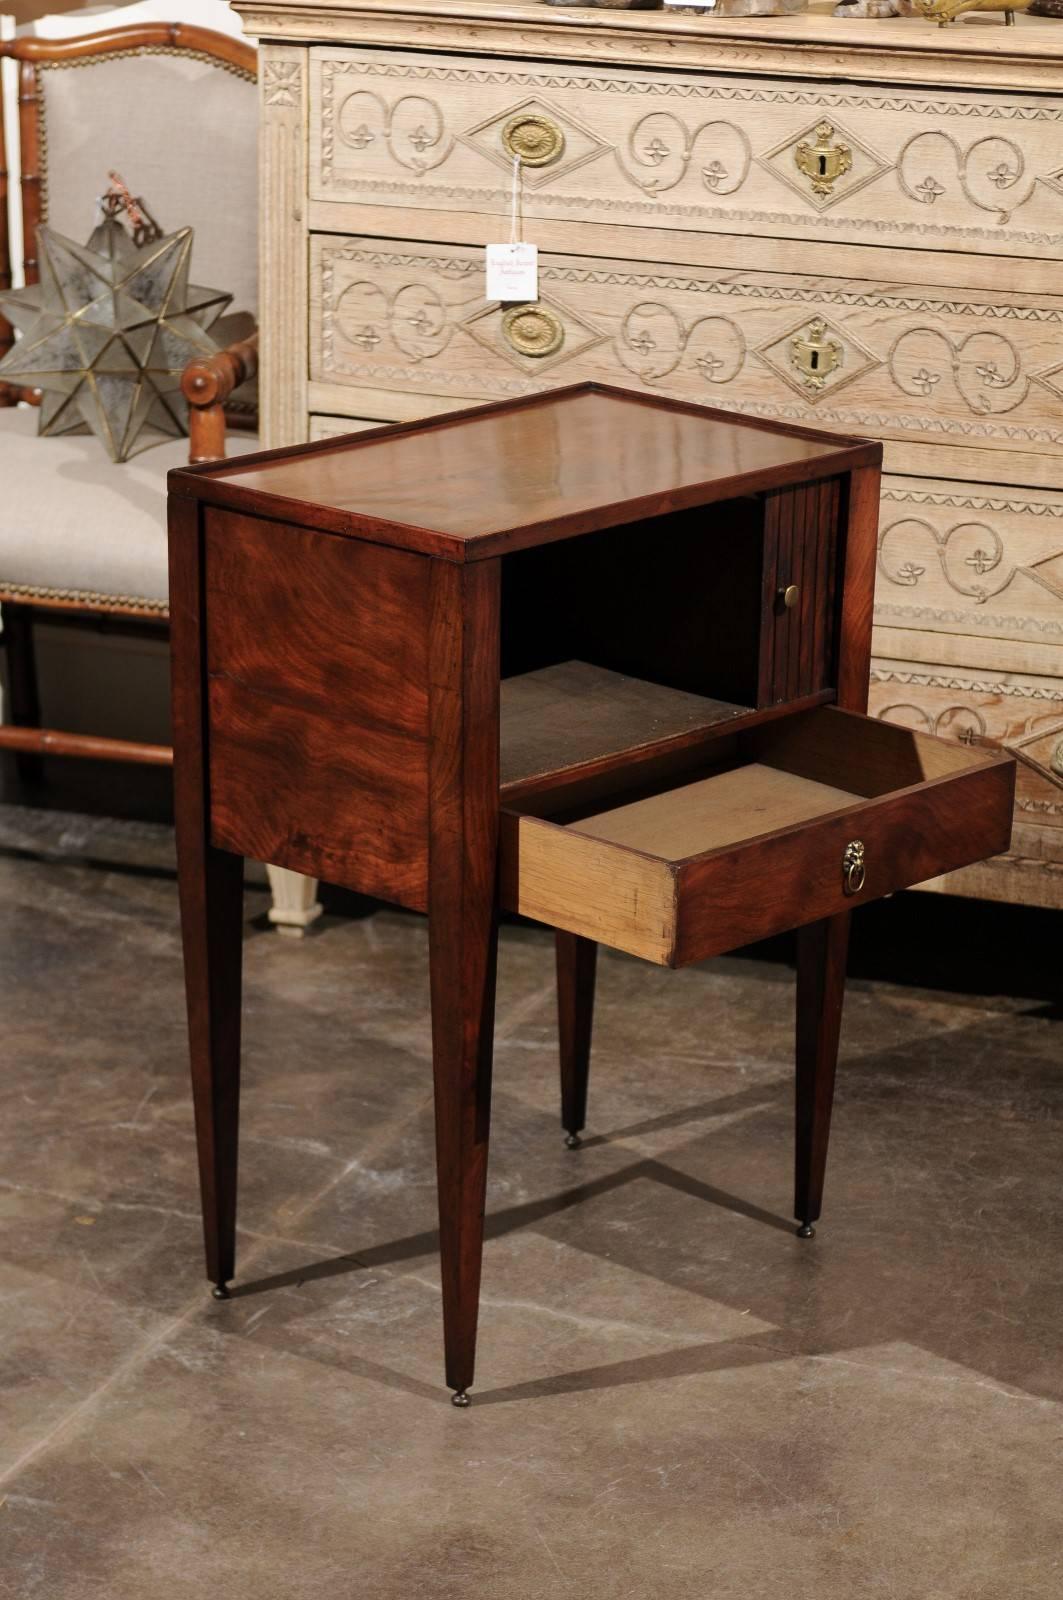 19th Century English 1880 Wooden Side Table with Tambour Door, Single Drawer and Tapered Legs